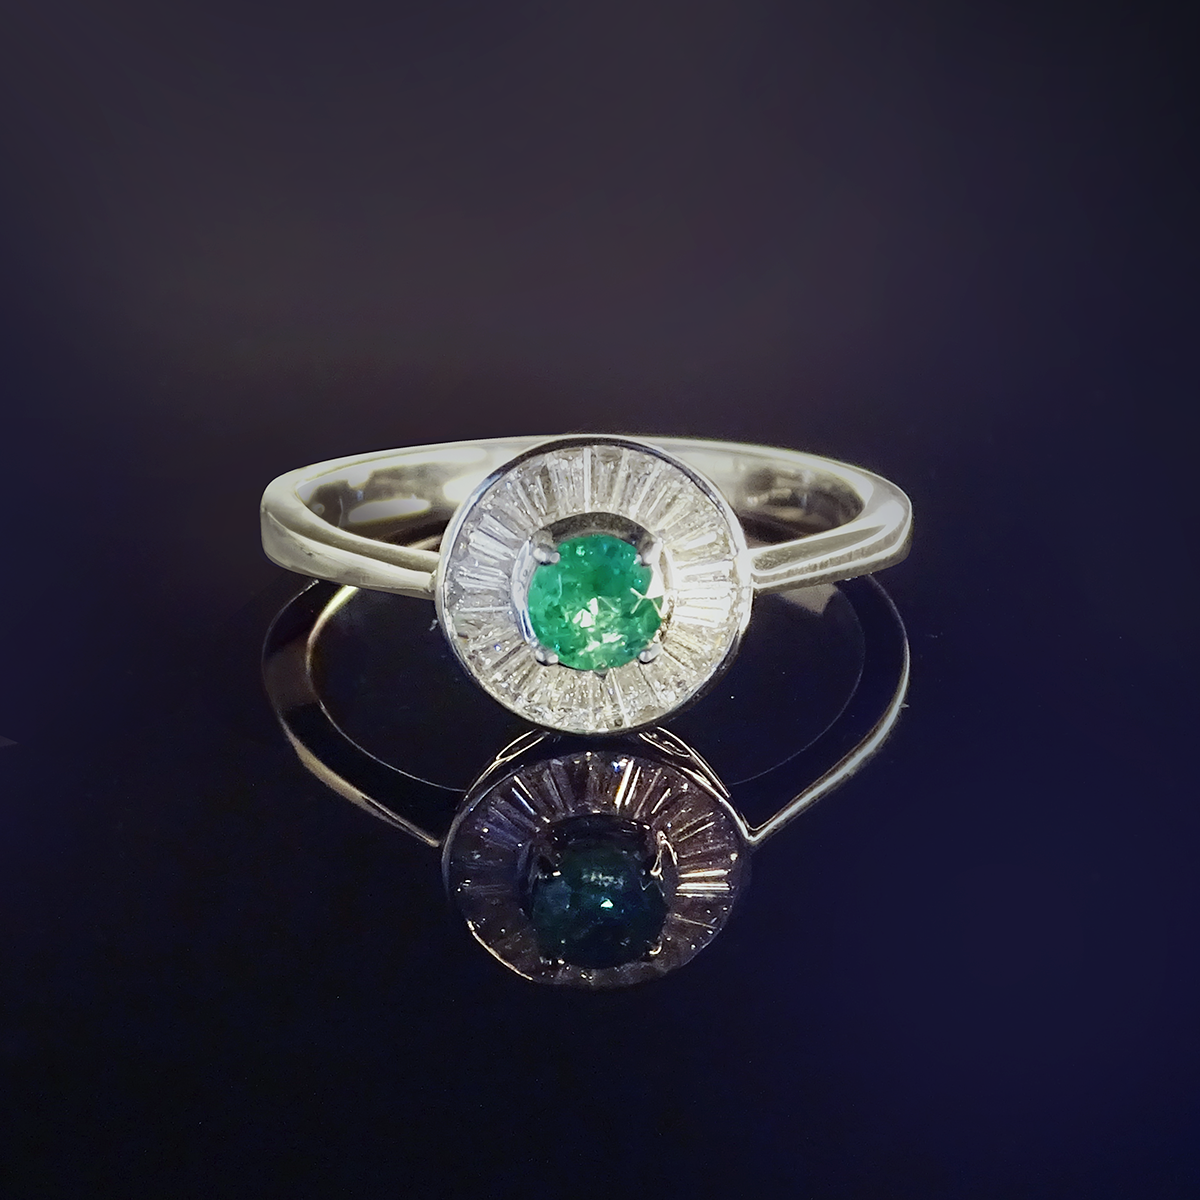 0.23ct Emerald and Diamond Baguette Halo Ring in 9ct White Gold